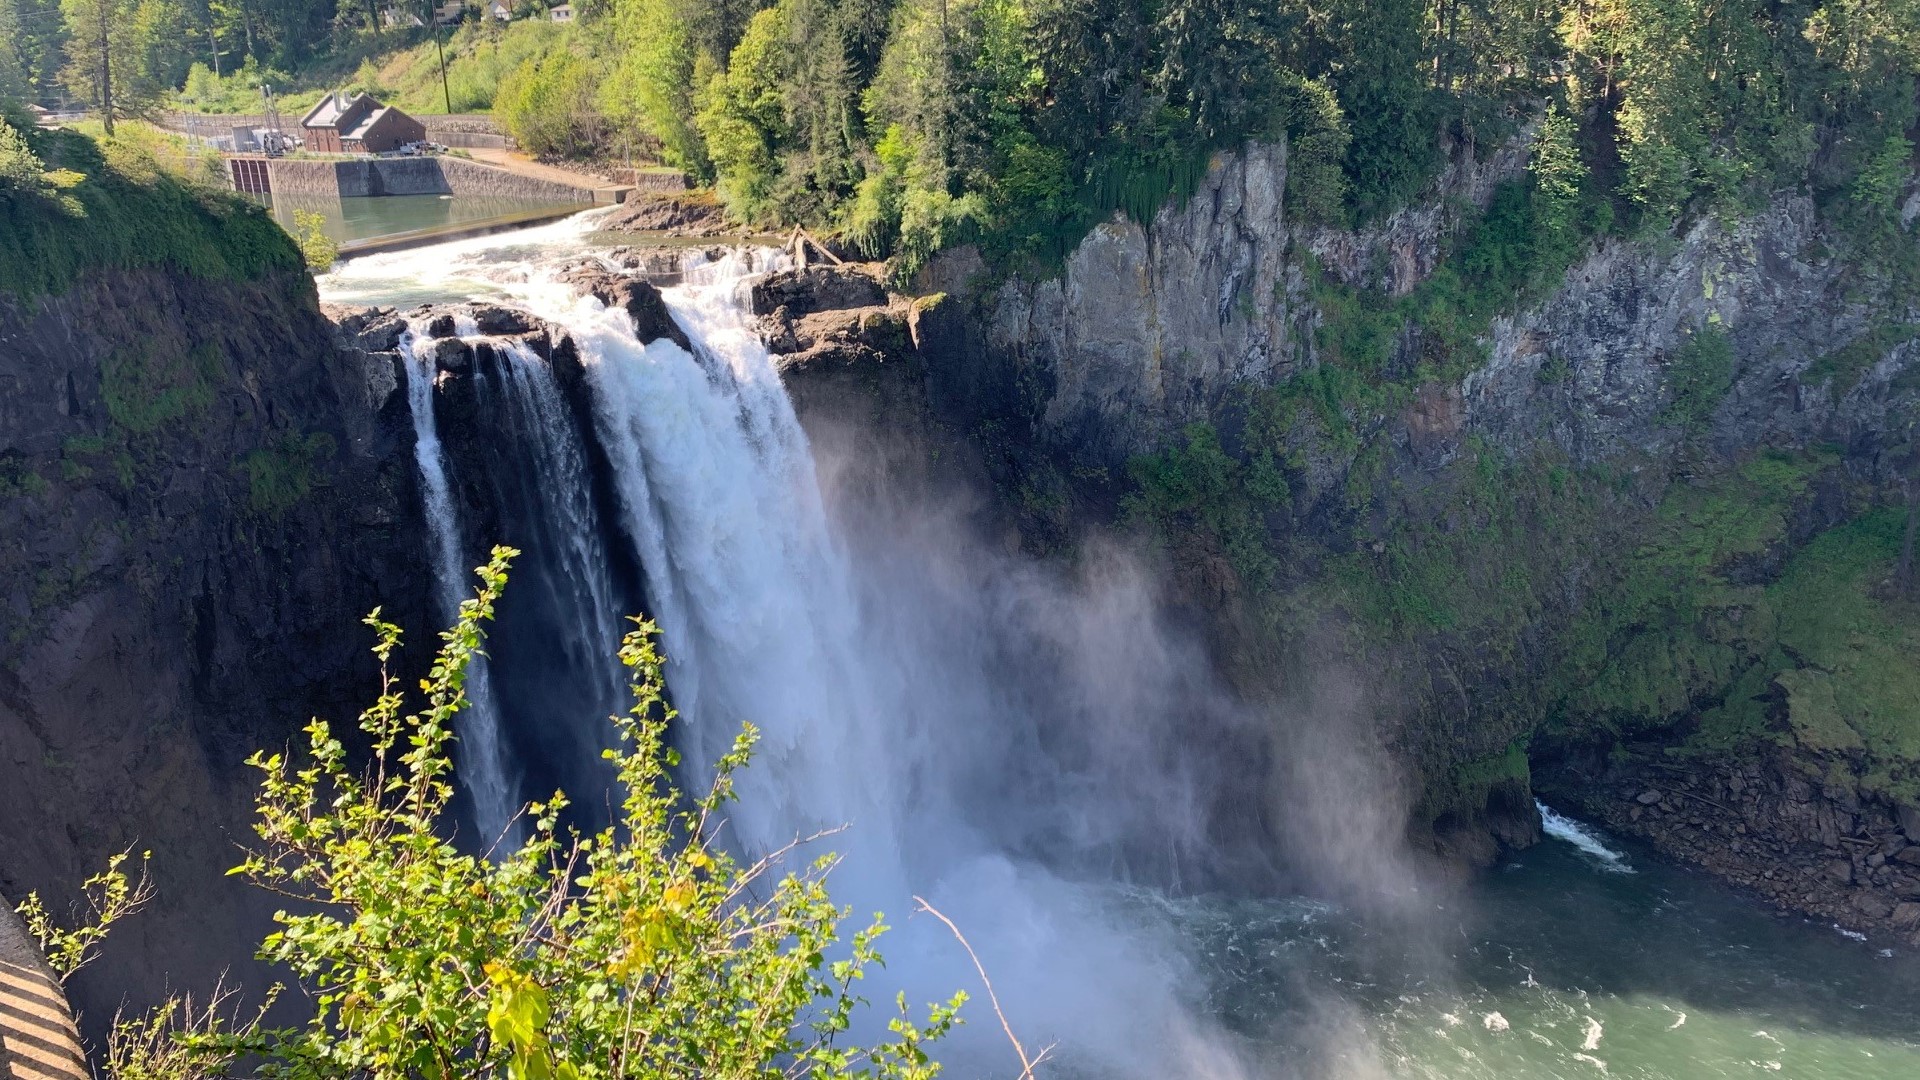 One of the best ways to spend a sunny day in Washington is to visit beautiful Snoqualmie Falls with some good food and friends. Snoqualmie Falls won Best Waterfall in 2019's Best Northwest Escapes.